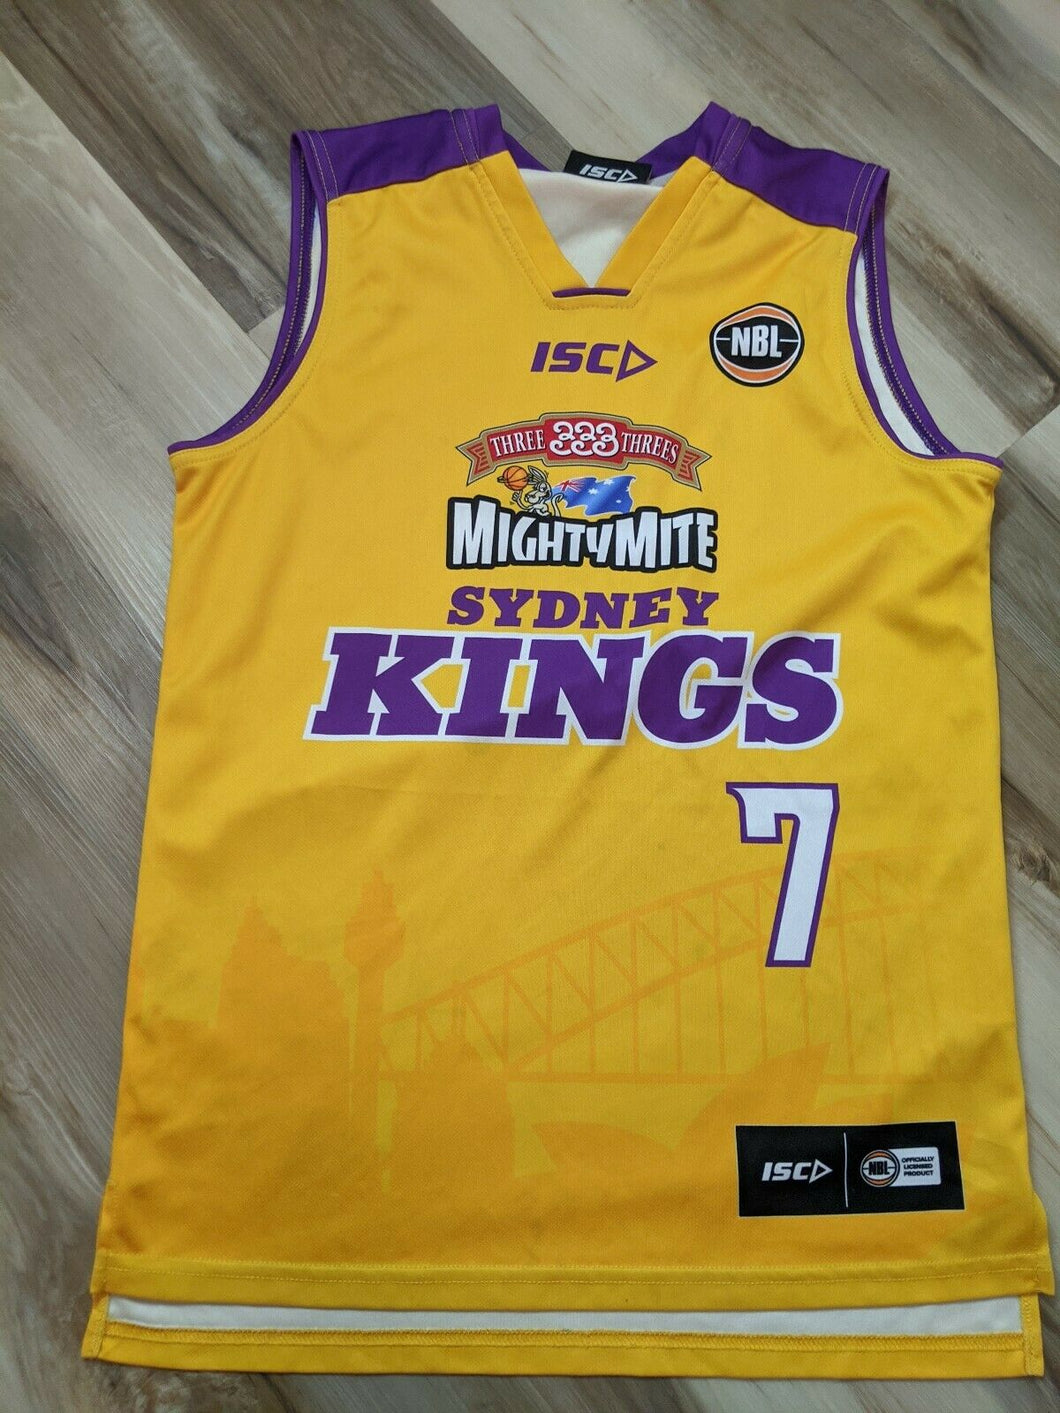 Autographed Pre-Owned Jersey - Josh Childress 2014 Sydney Kings